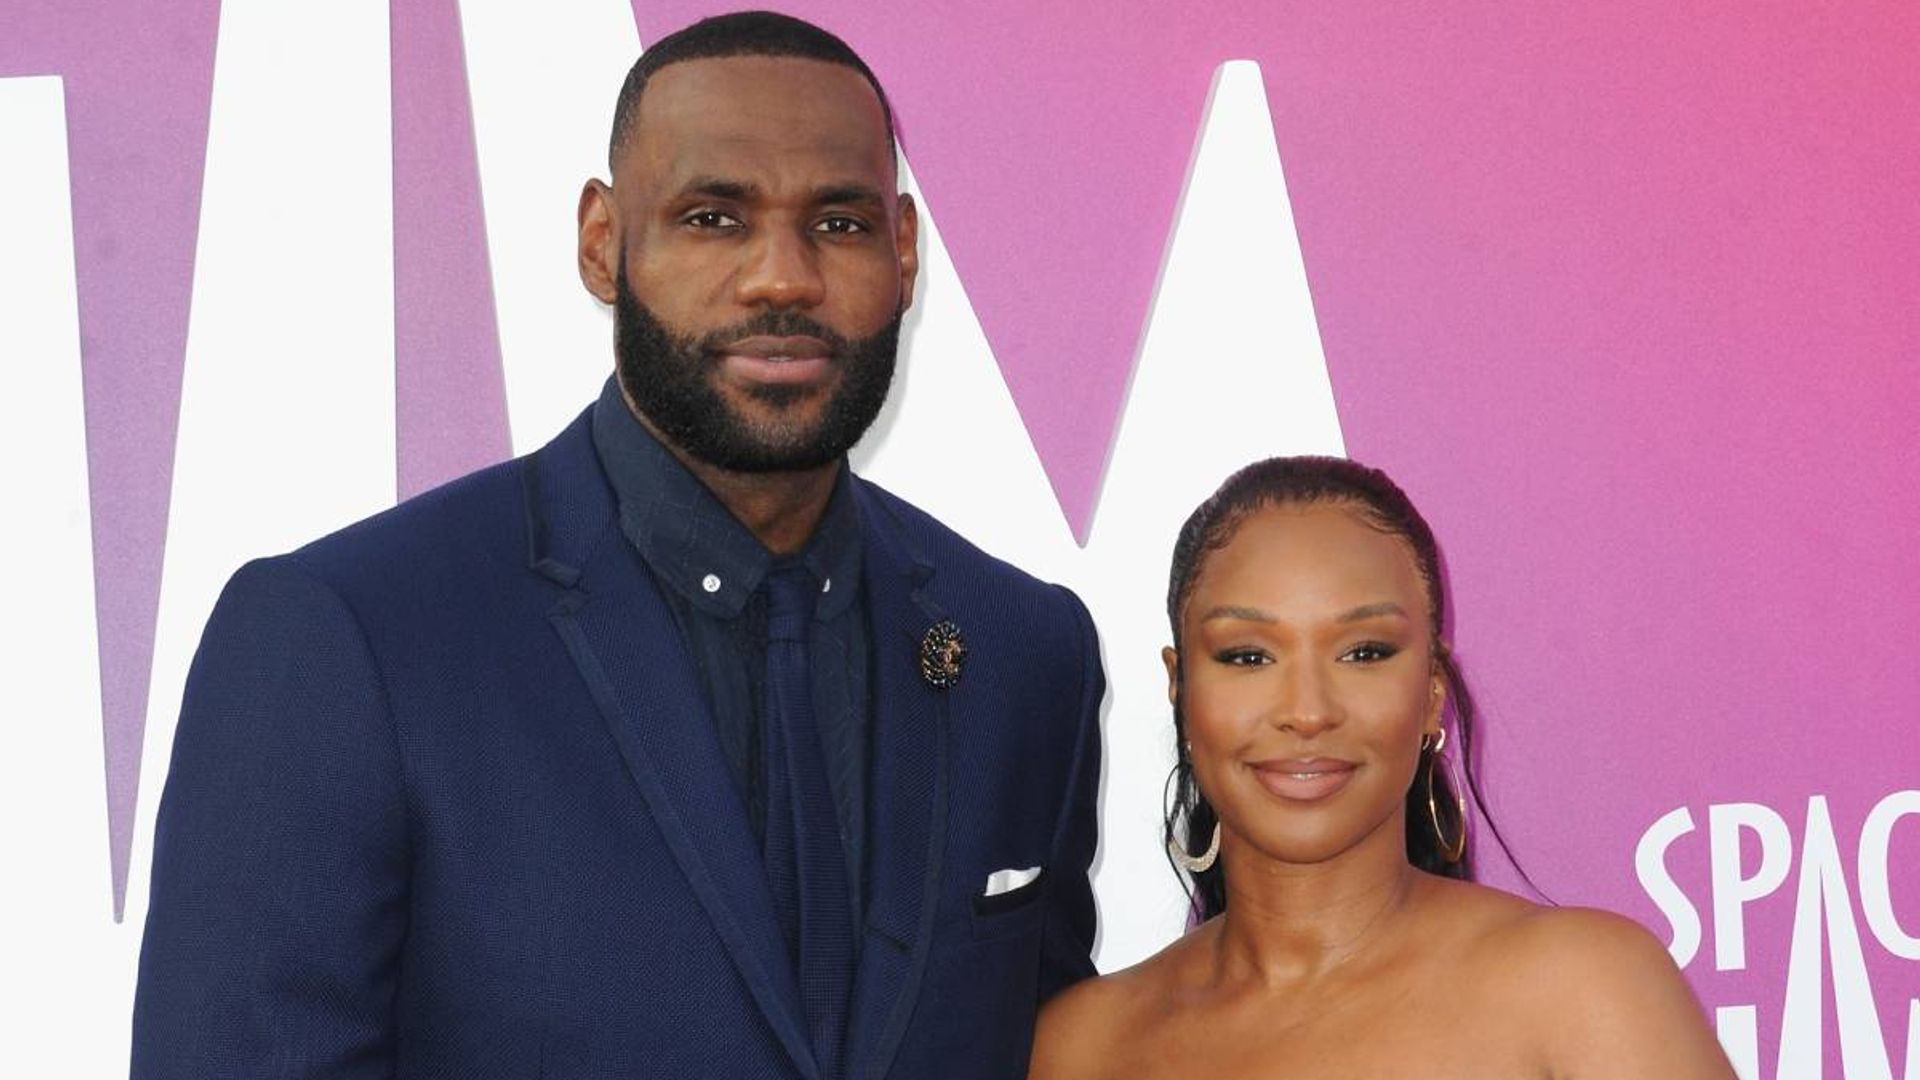 Who is LeBron James' family? Lakers star's wife and three kids